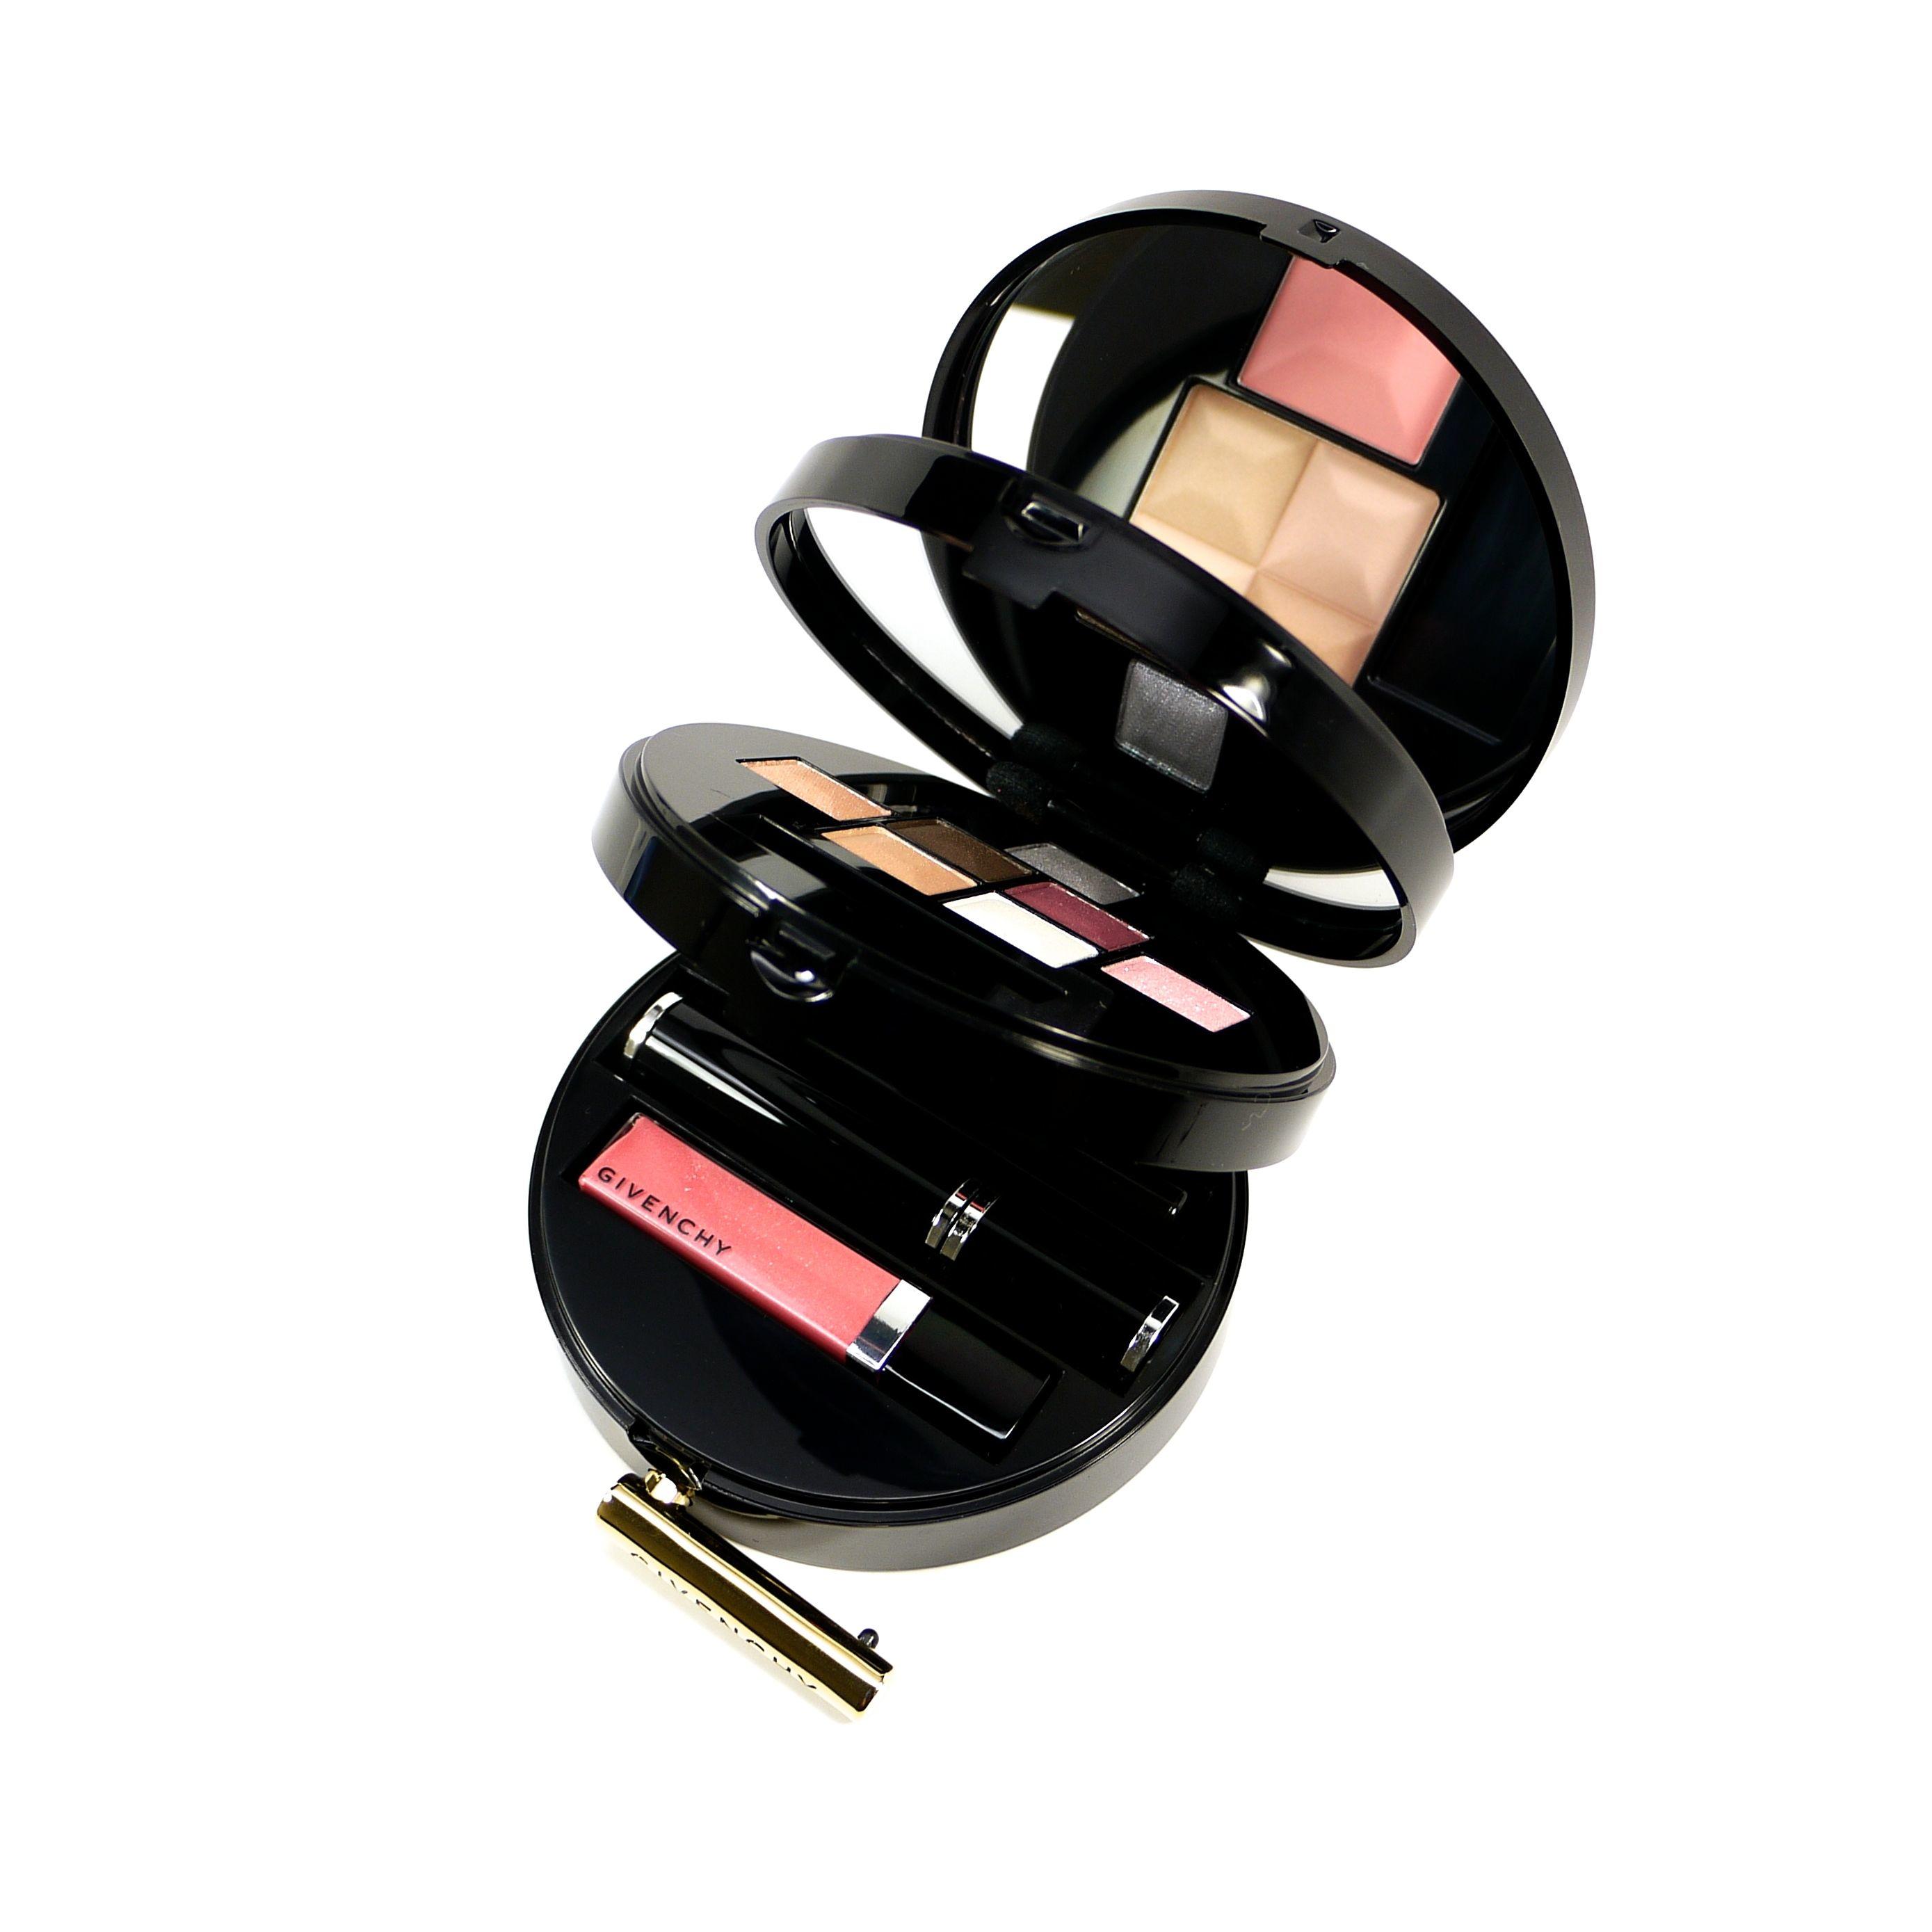 givenchy glamour on the gold travel makeup palette